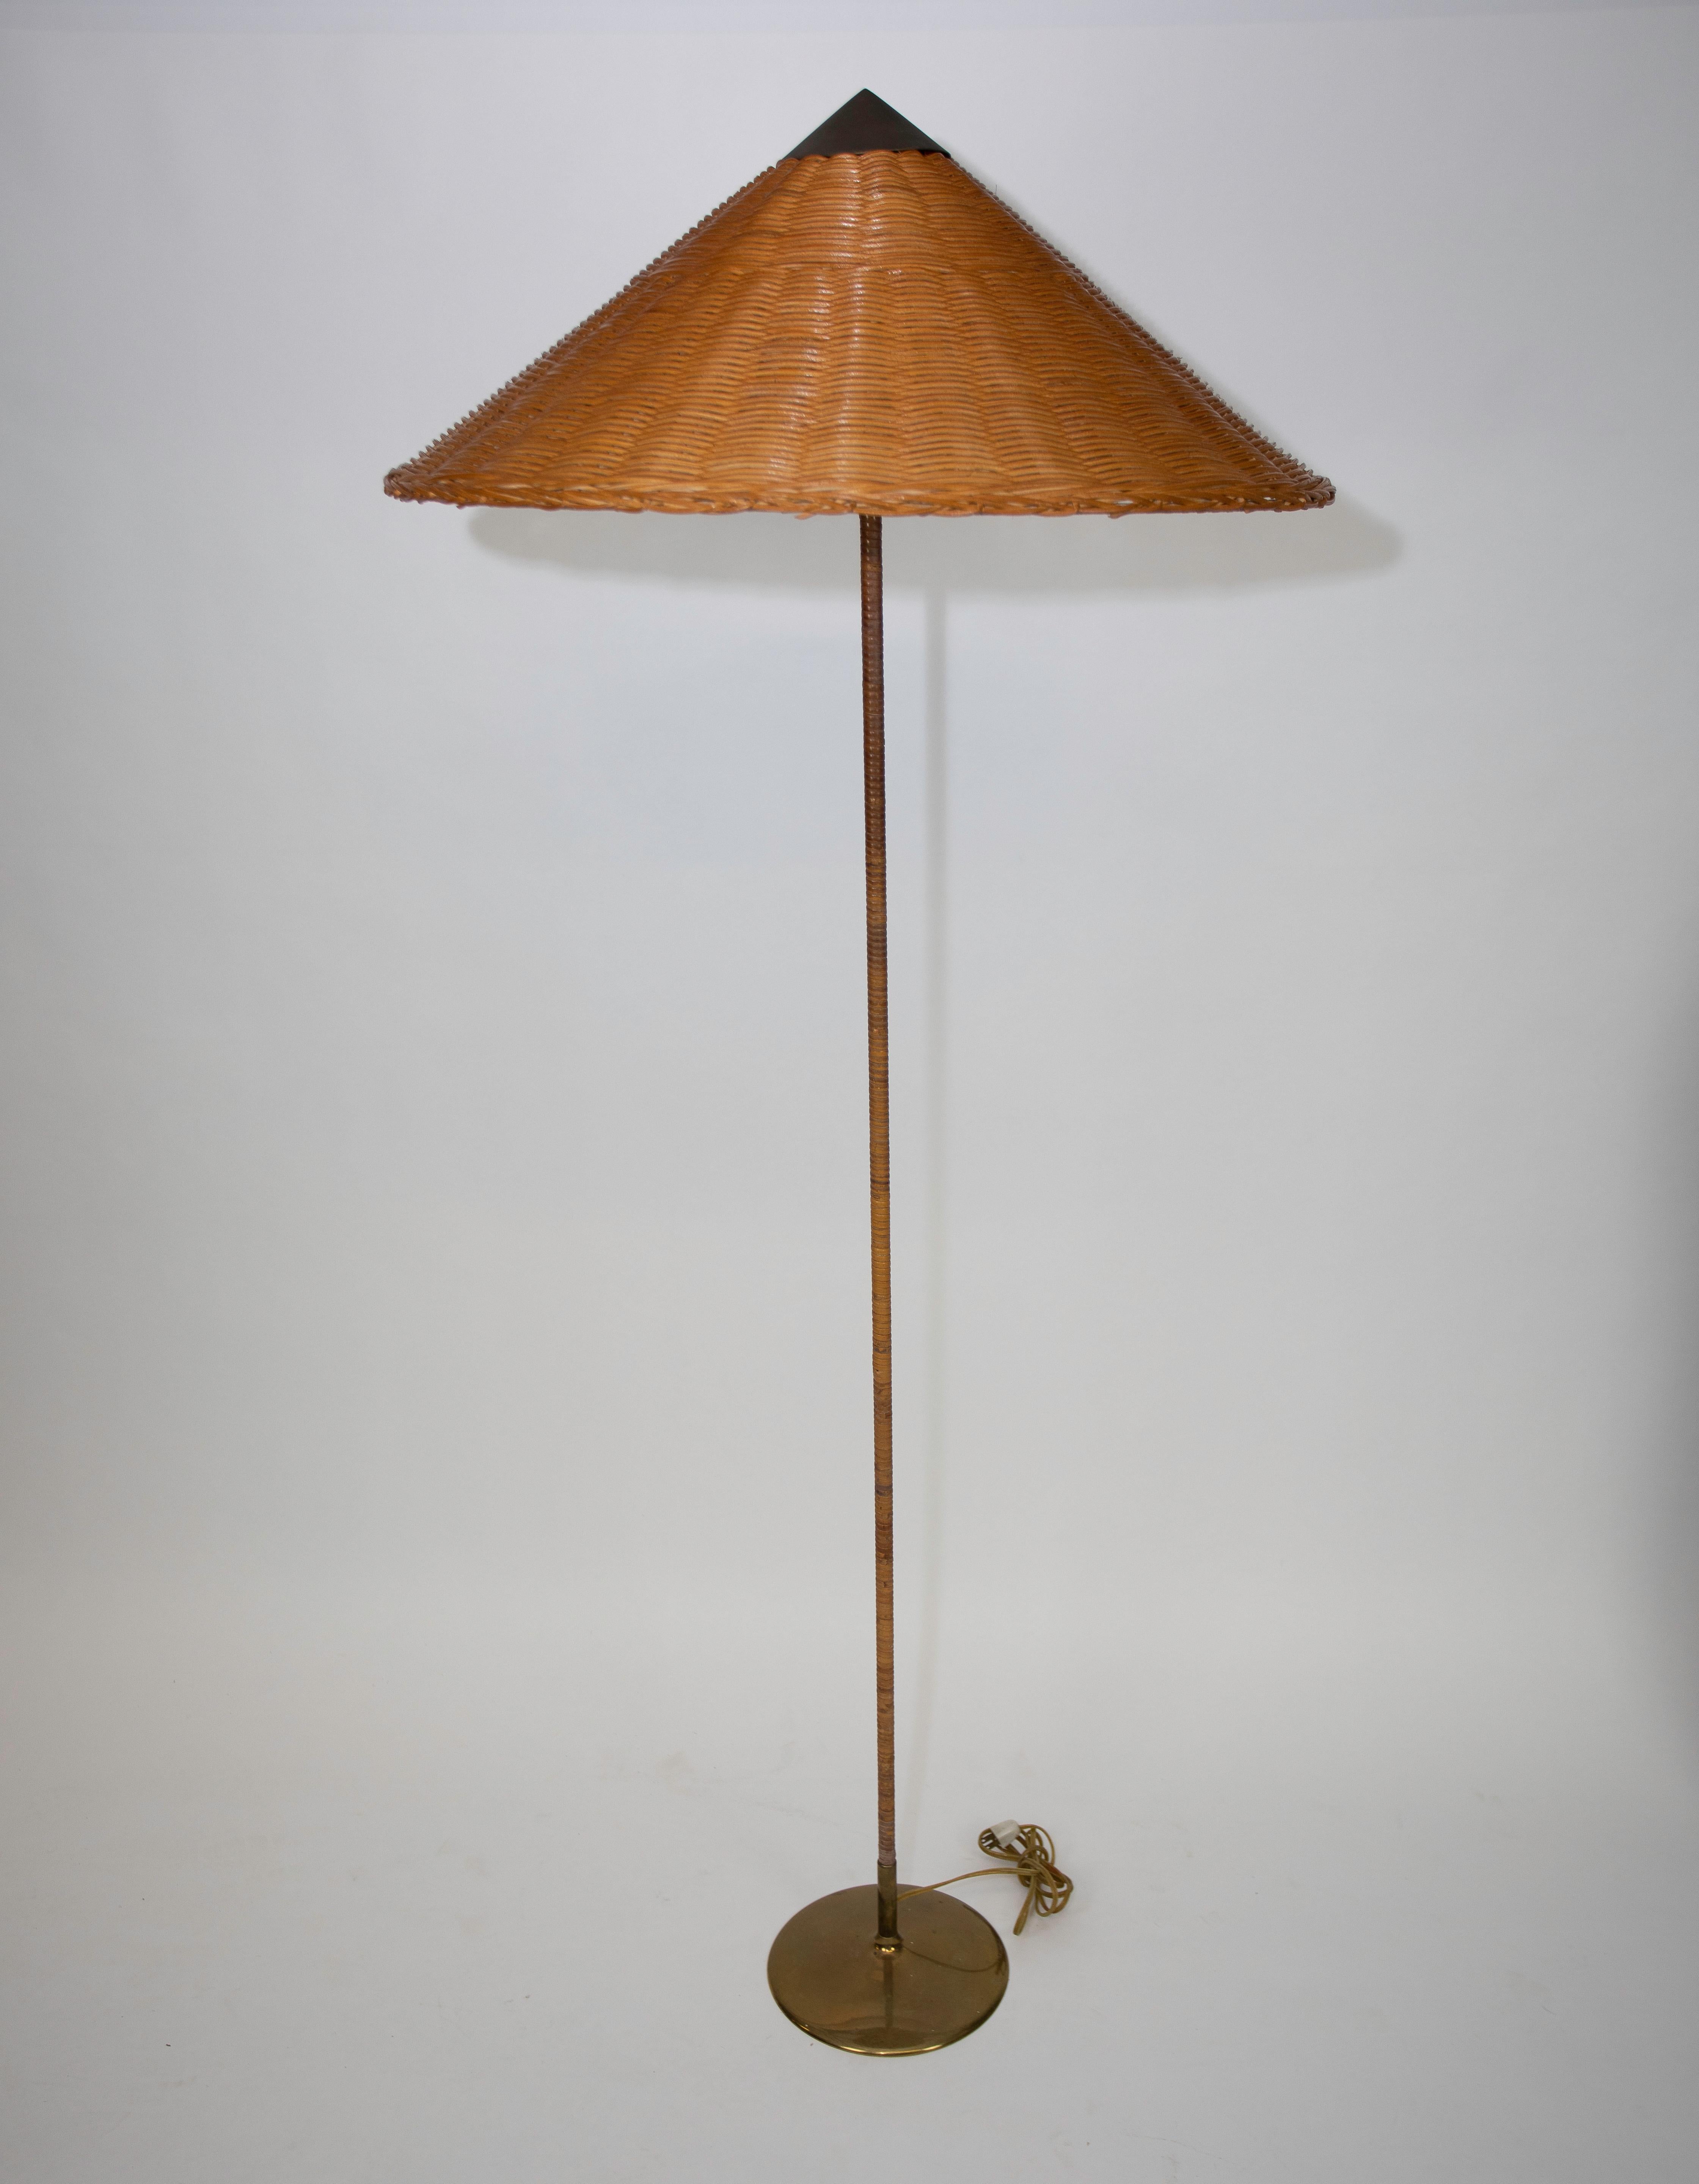 Paavo Tynell Floor lamp
From the original production C. 1950
Original Surface to the brass
Shade is a new reproduction of the original
Stamped Taito Oy 